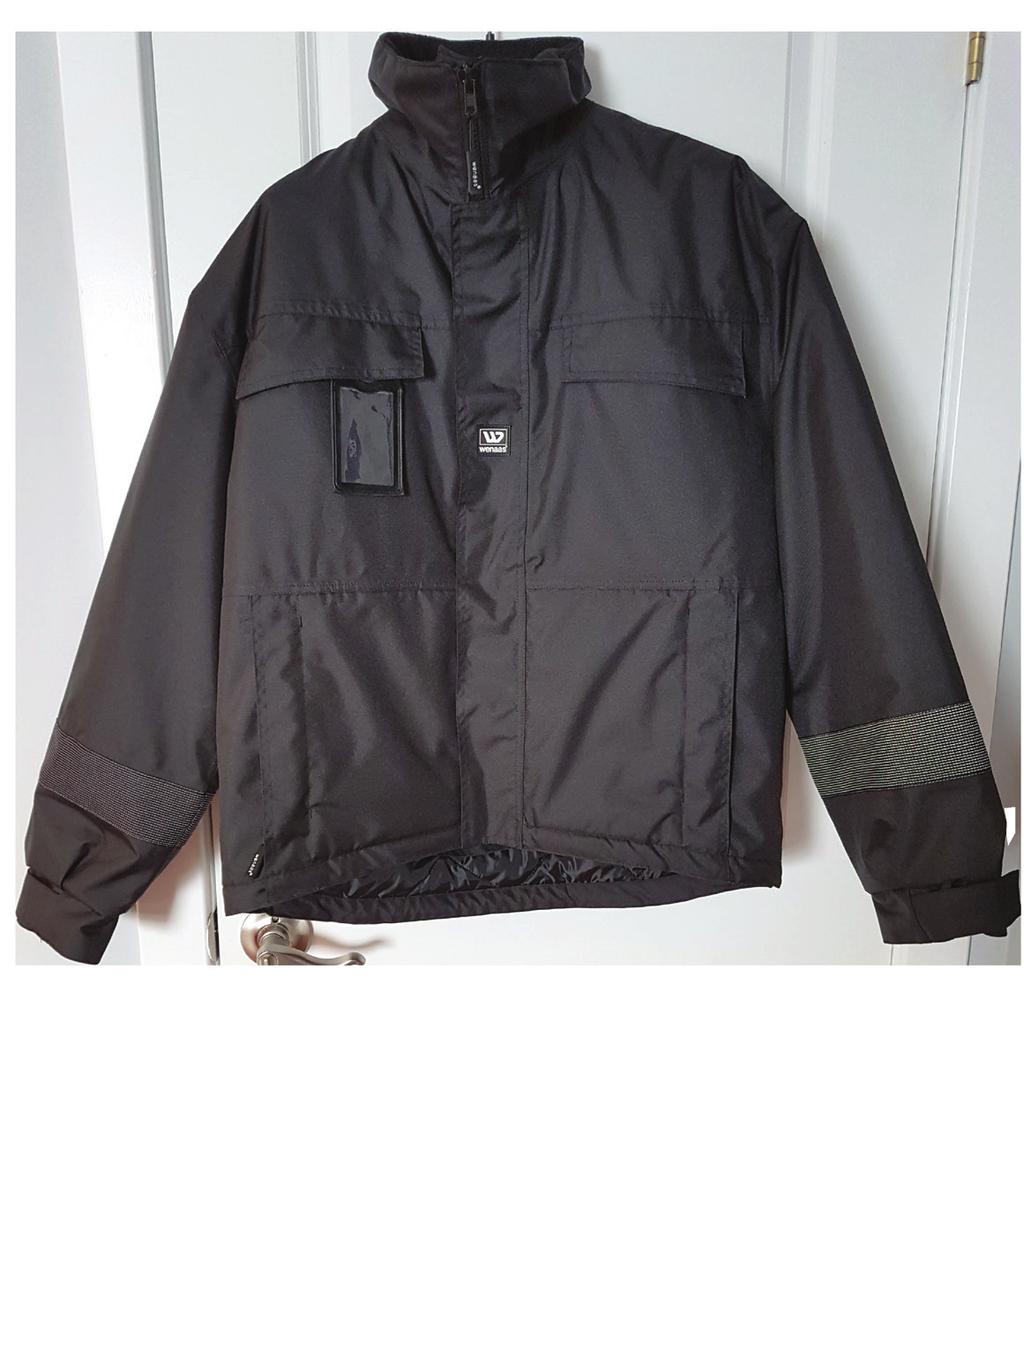 / ID pocket / Front zip flap / Chest pockets with velcro on flaps / Storm pocket with zipper / Inside